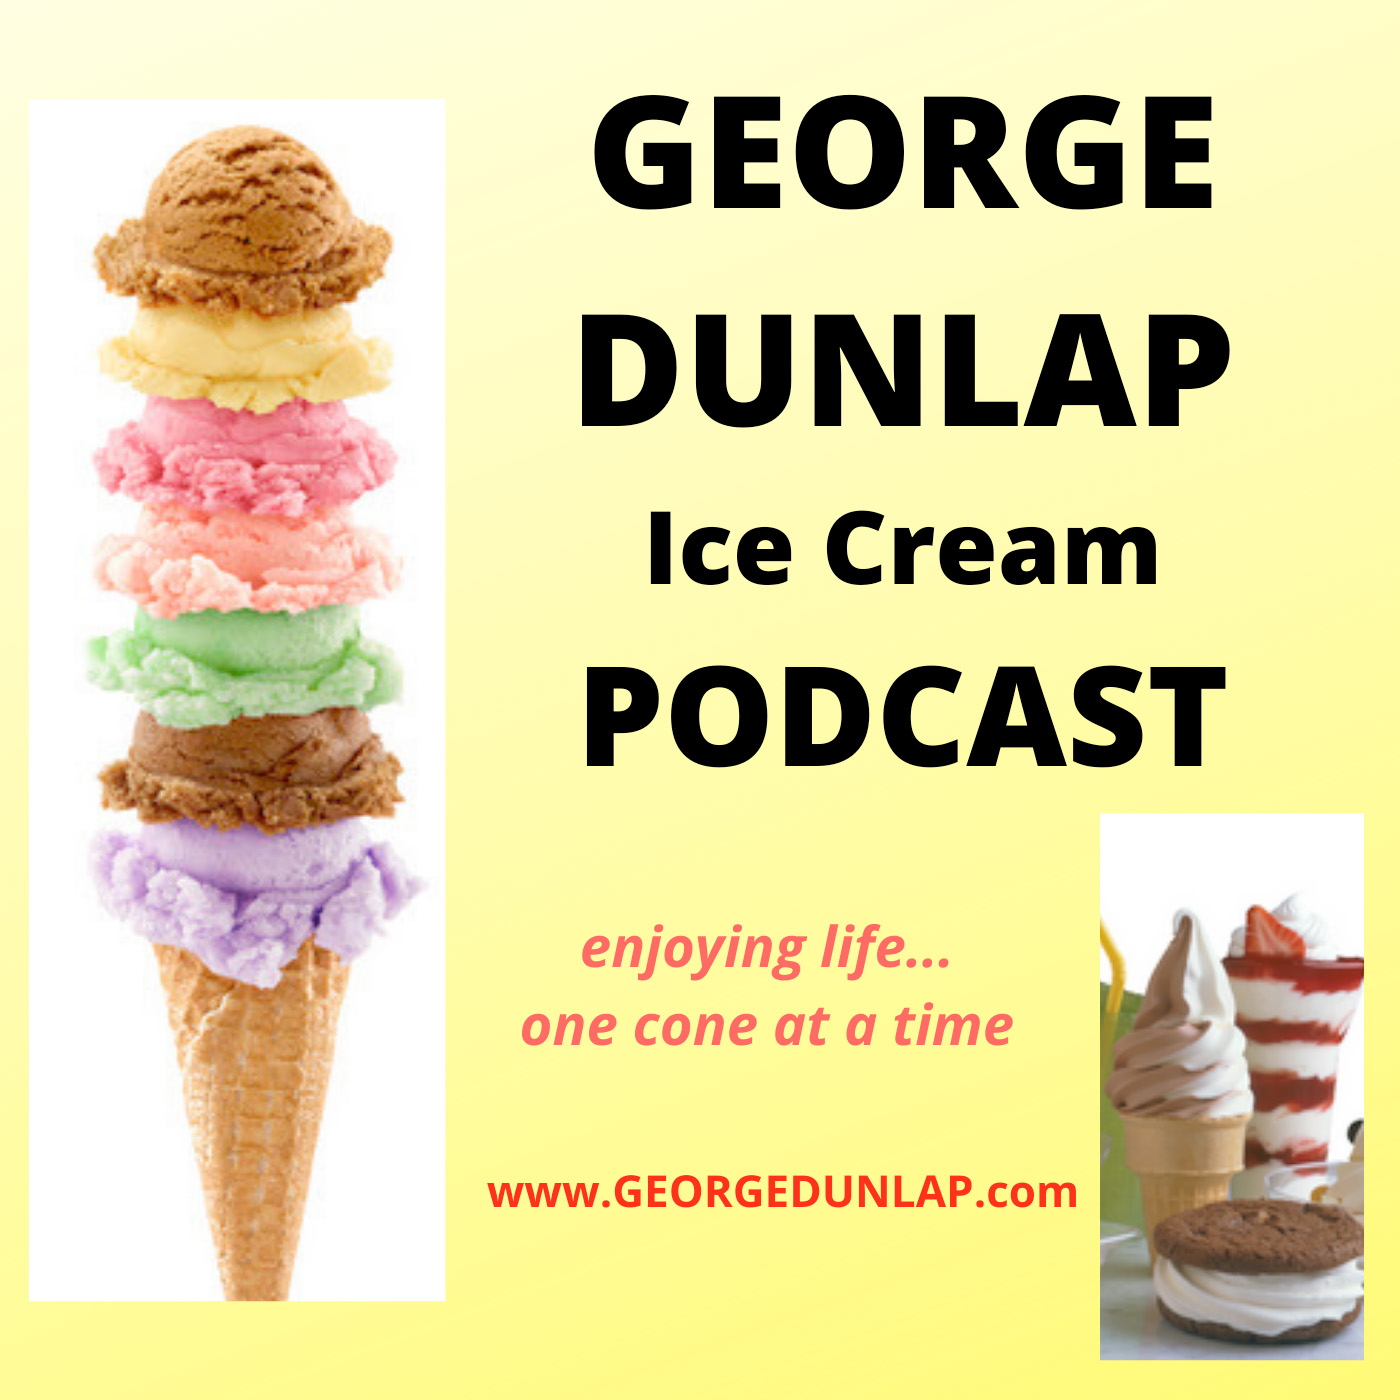 George Dunlap, The Ice Cream Guy "conversations with my friends in the retail ice cream shop industry"